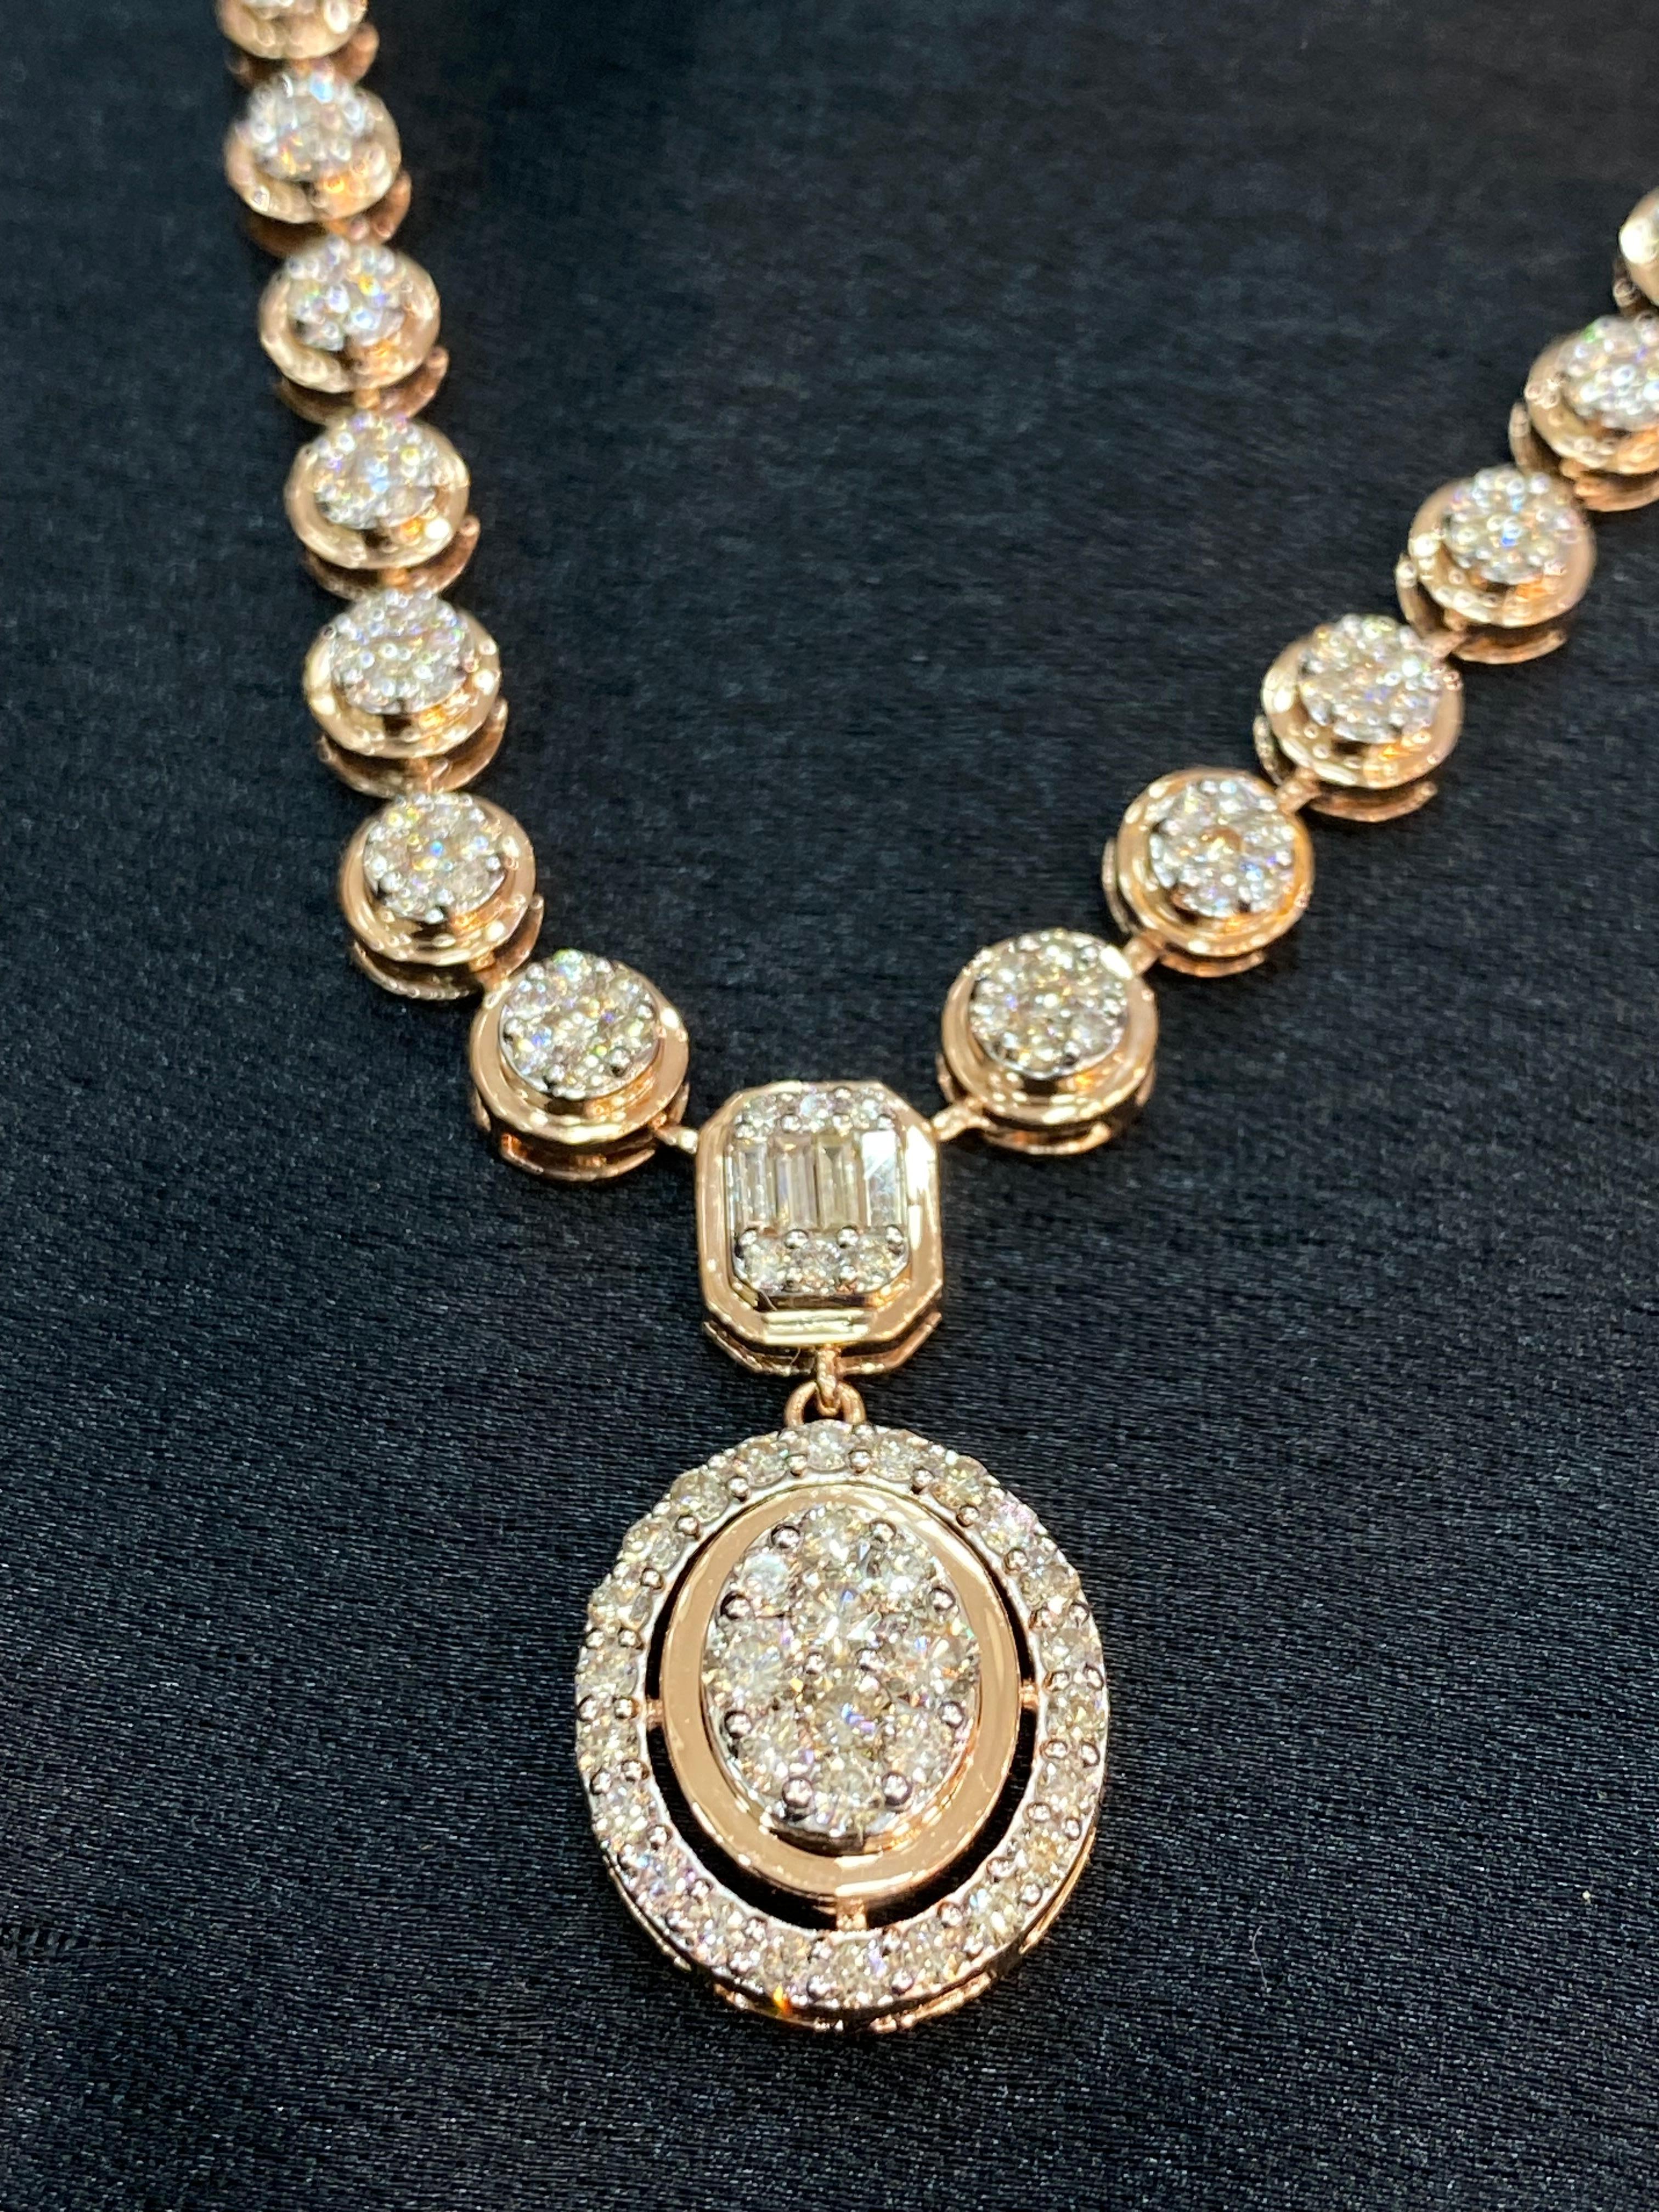 Adorn yourself with this exquisite necklace showcasing 2.40 carats of natural round baguette-shaped diamonds set in authentic 14K rose gold. Elevate your style and be the center of attention at any event!

Specifications : 

Diamond Weight : 2.40